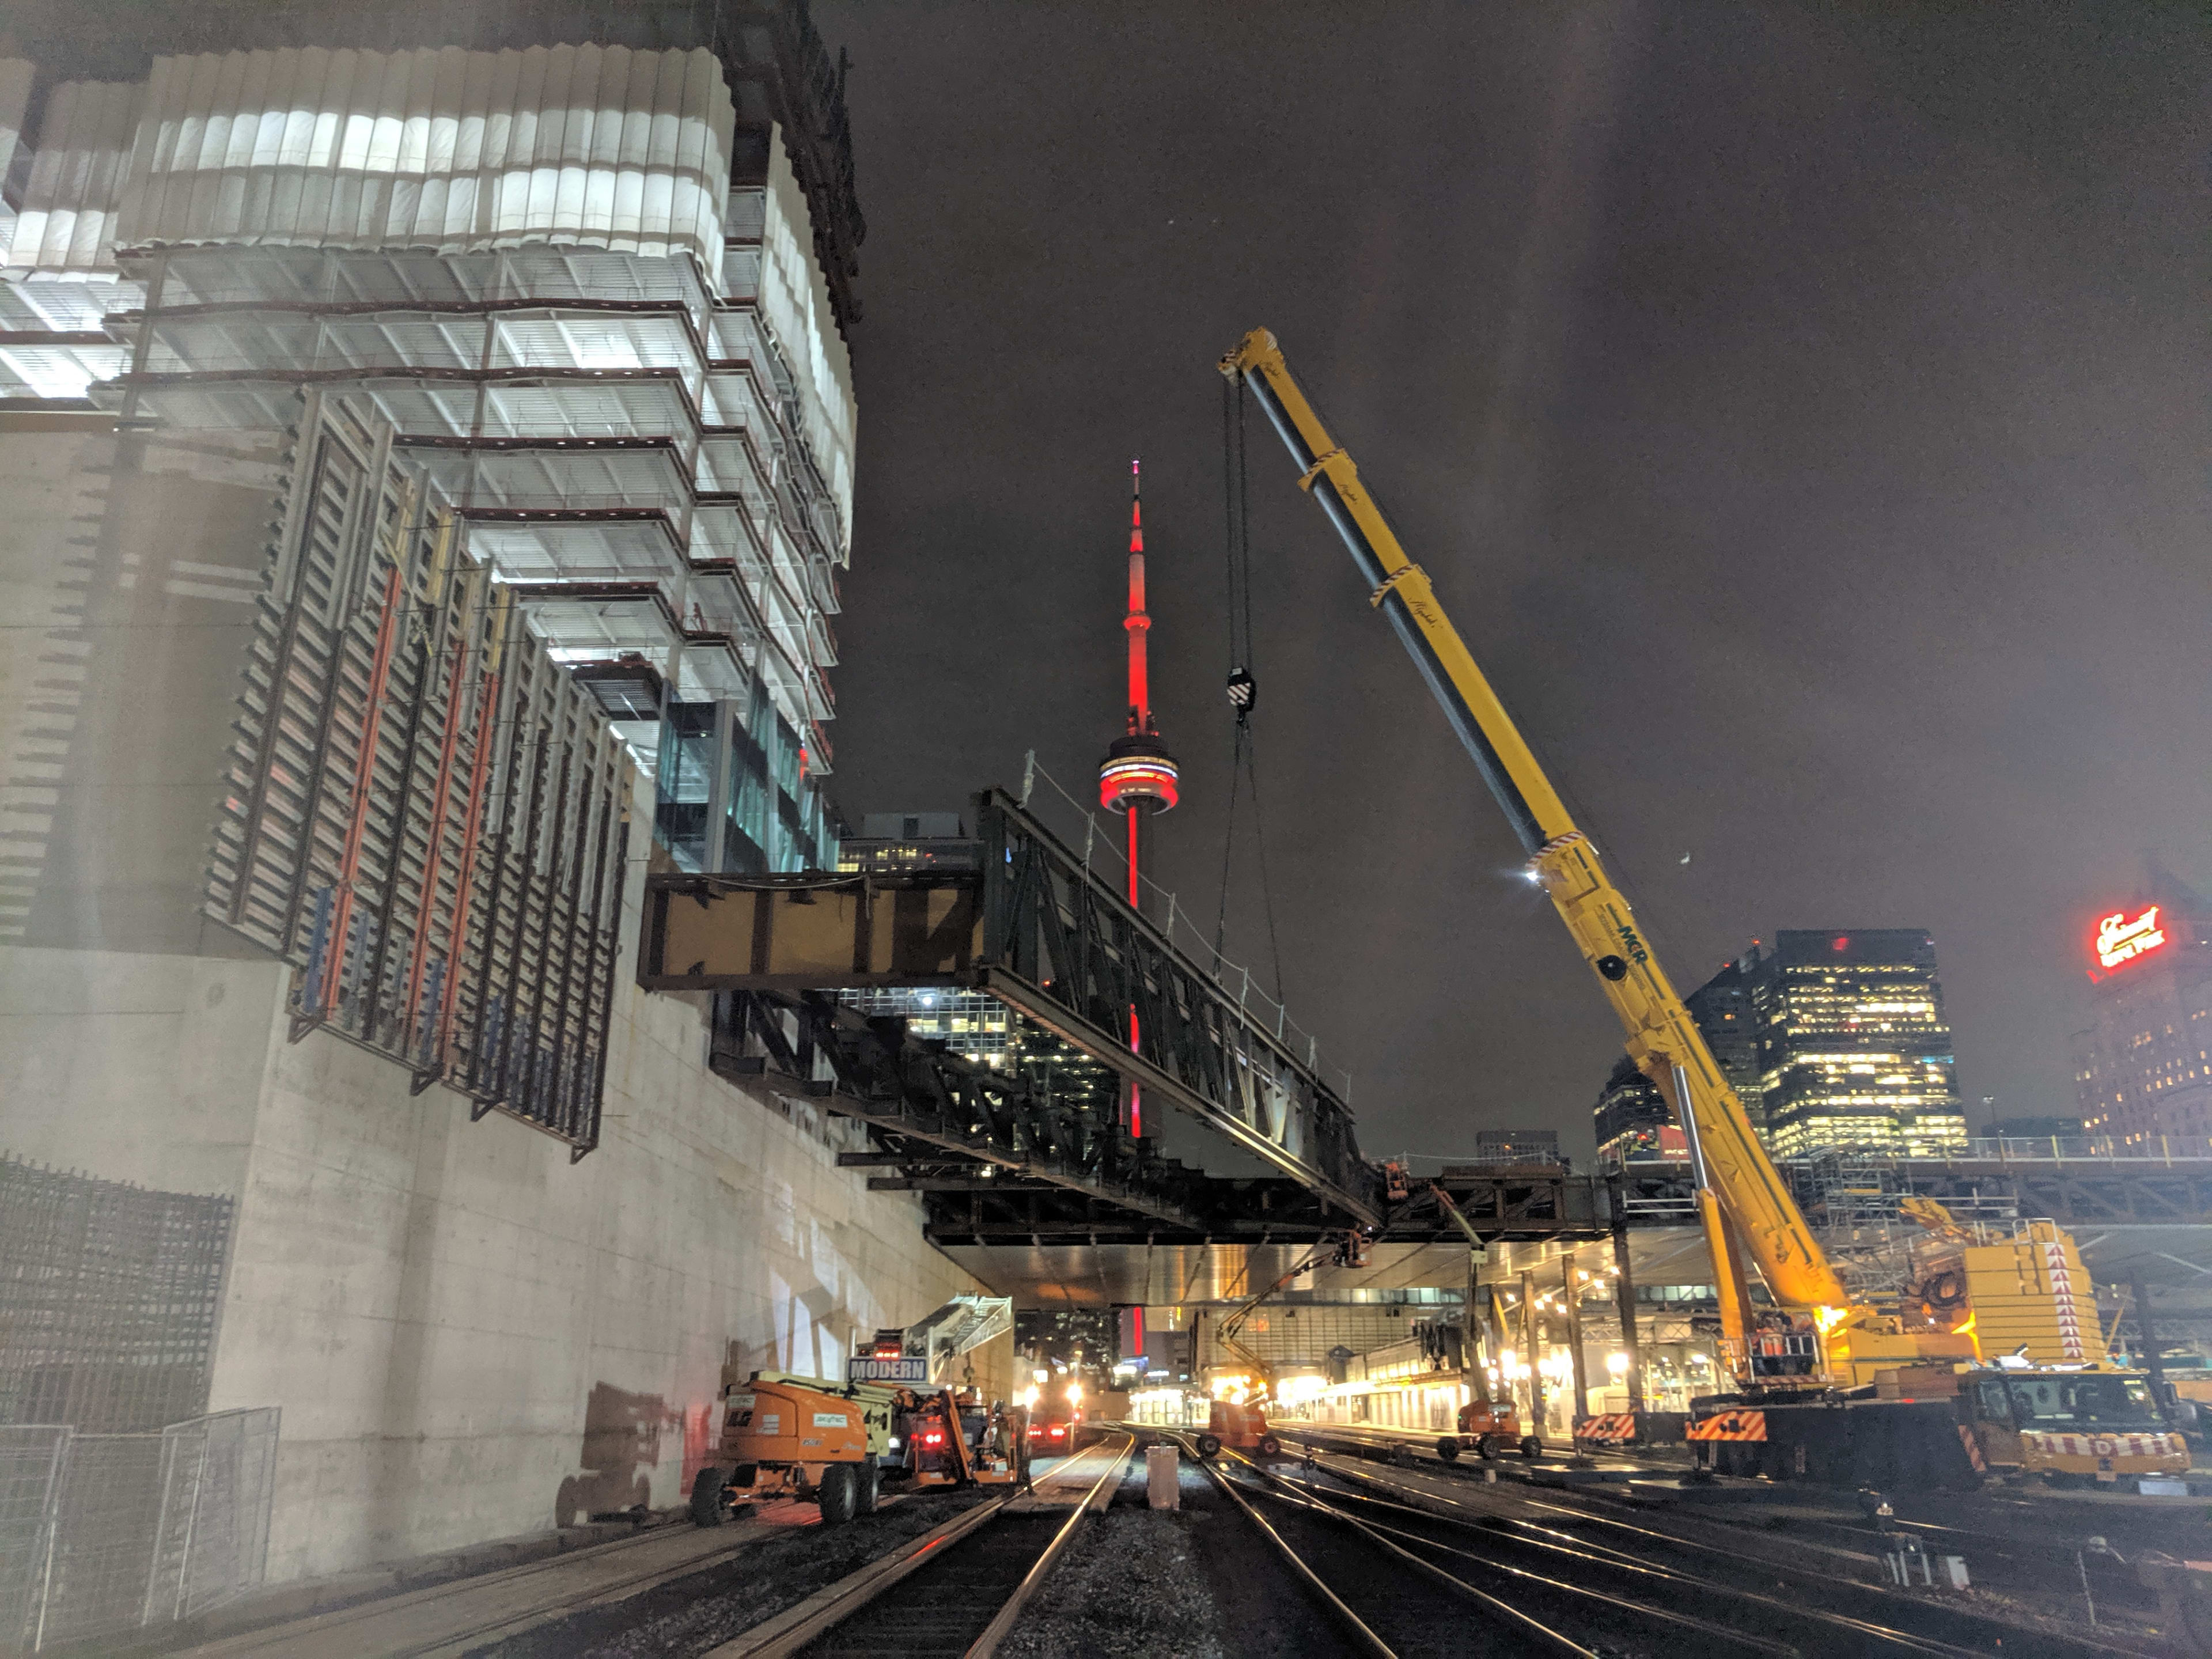 large yellow crane lifts big piece of metal into place with the lit up CN Tower in the backgound.